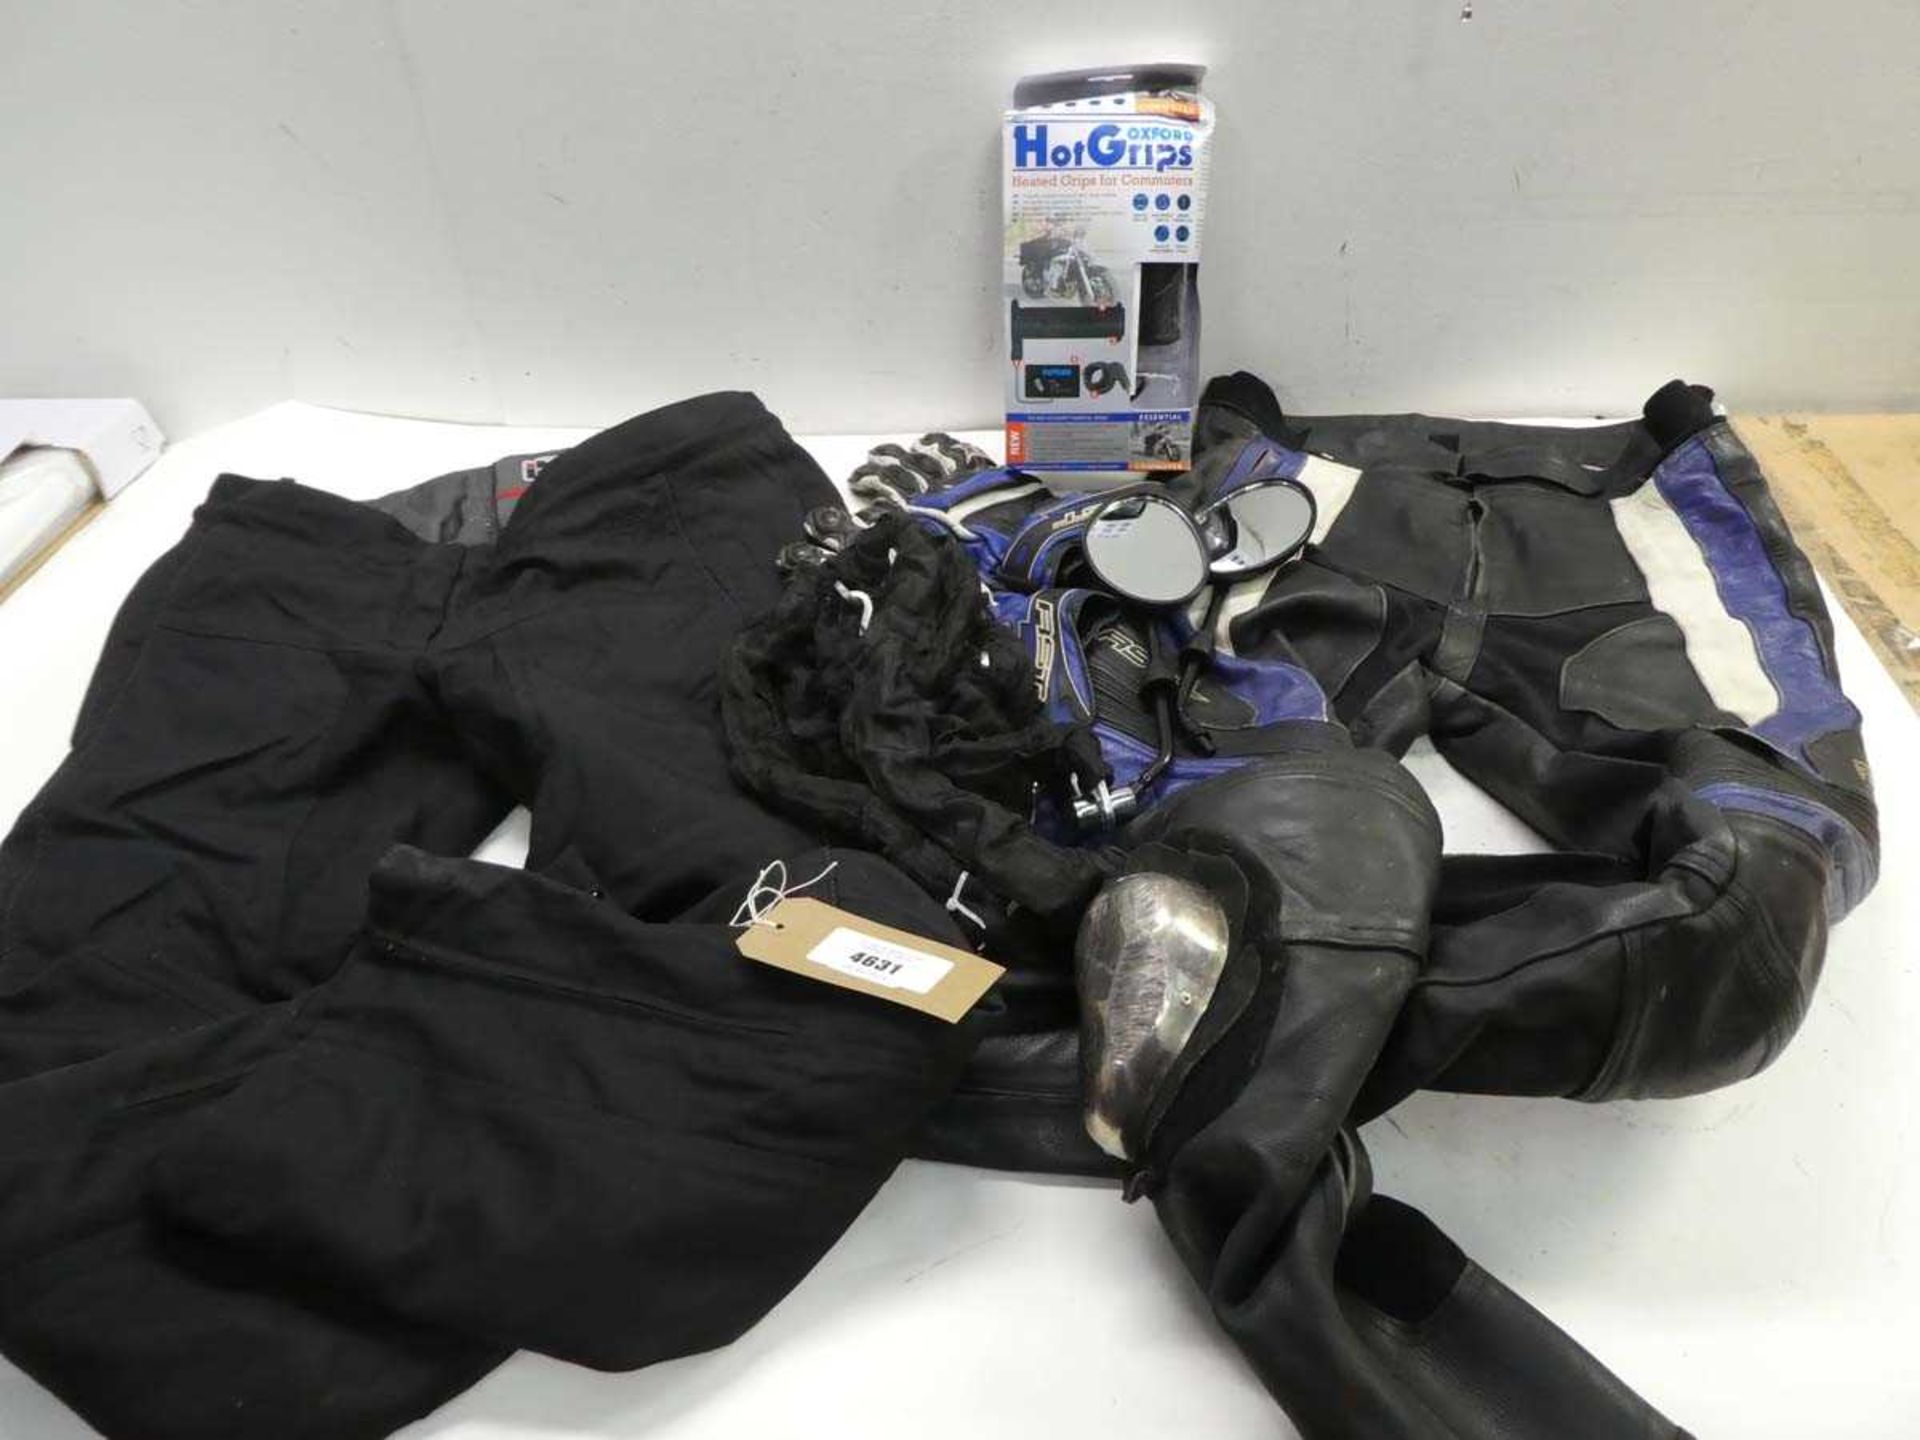 +VAT RST Size 34 used motorcycle trousers, Pair of Size 2XL motorcycle trousers, wingmirrors, heated